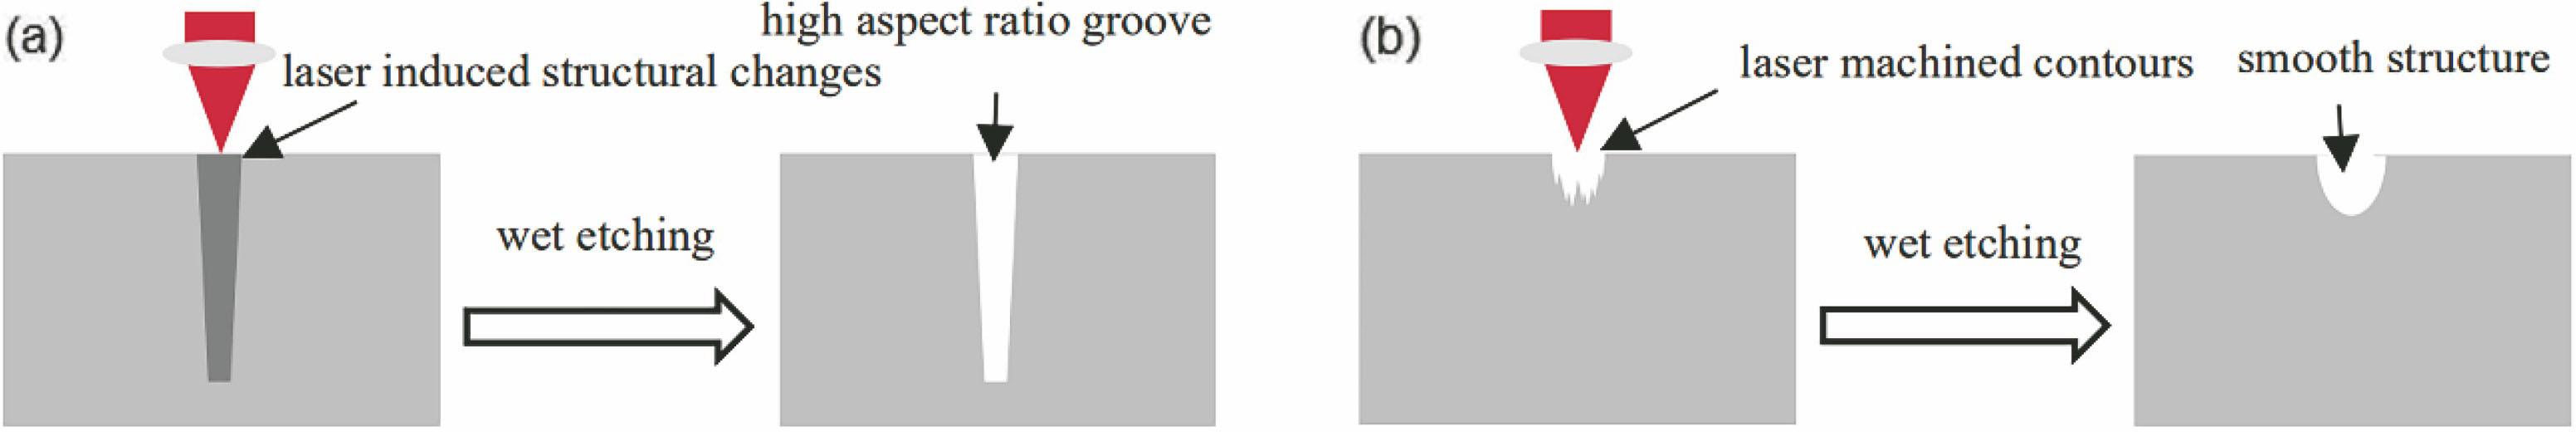 Flow chart of femtosecond laser irradiation and wet etching. (a) Fabrication of high aspect ratio groove by femtosecond laser irradiation and wet etching; (b) fabrication of micro-lens by femtosecond laser irradiation and wet etching